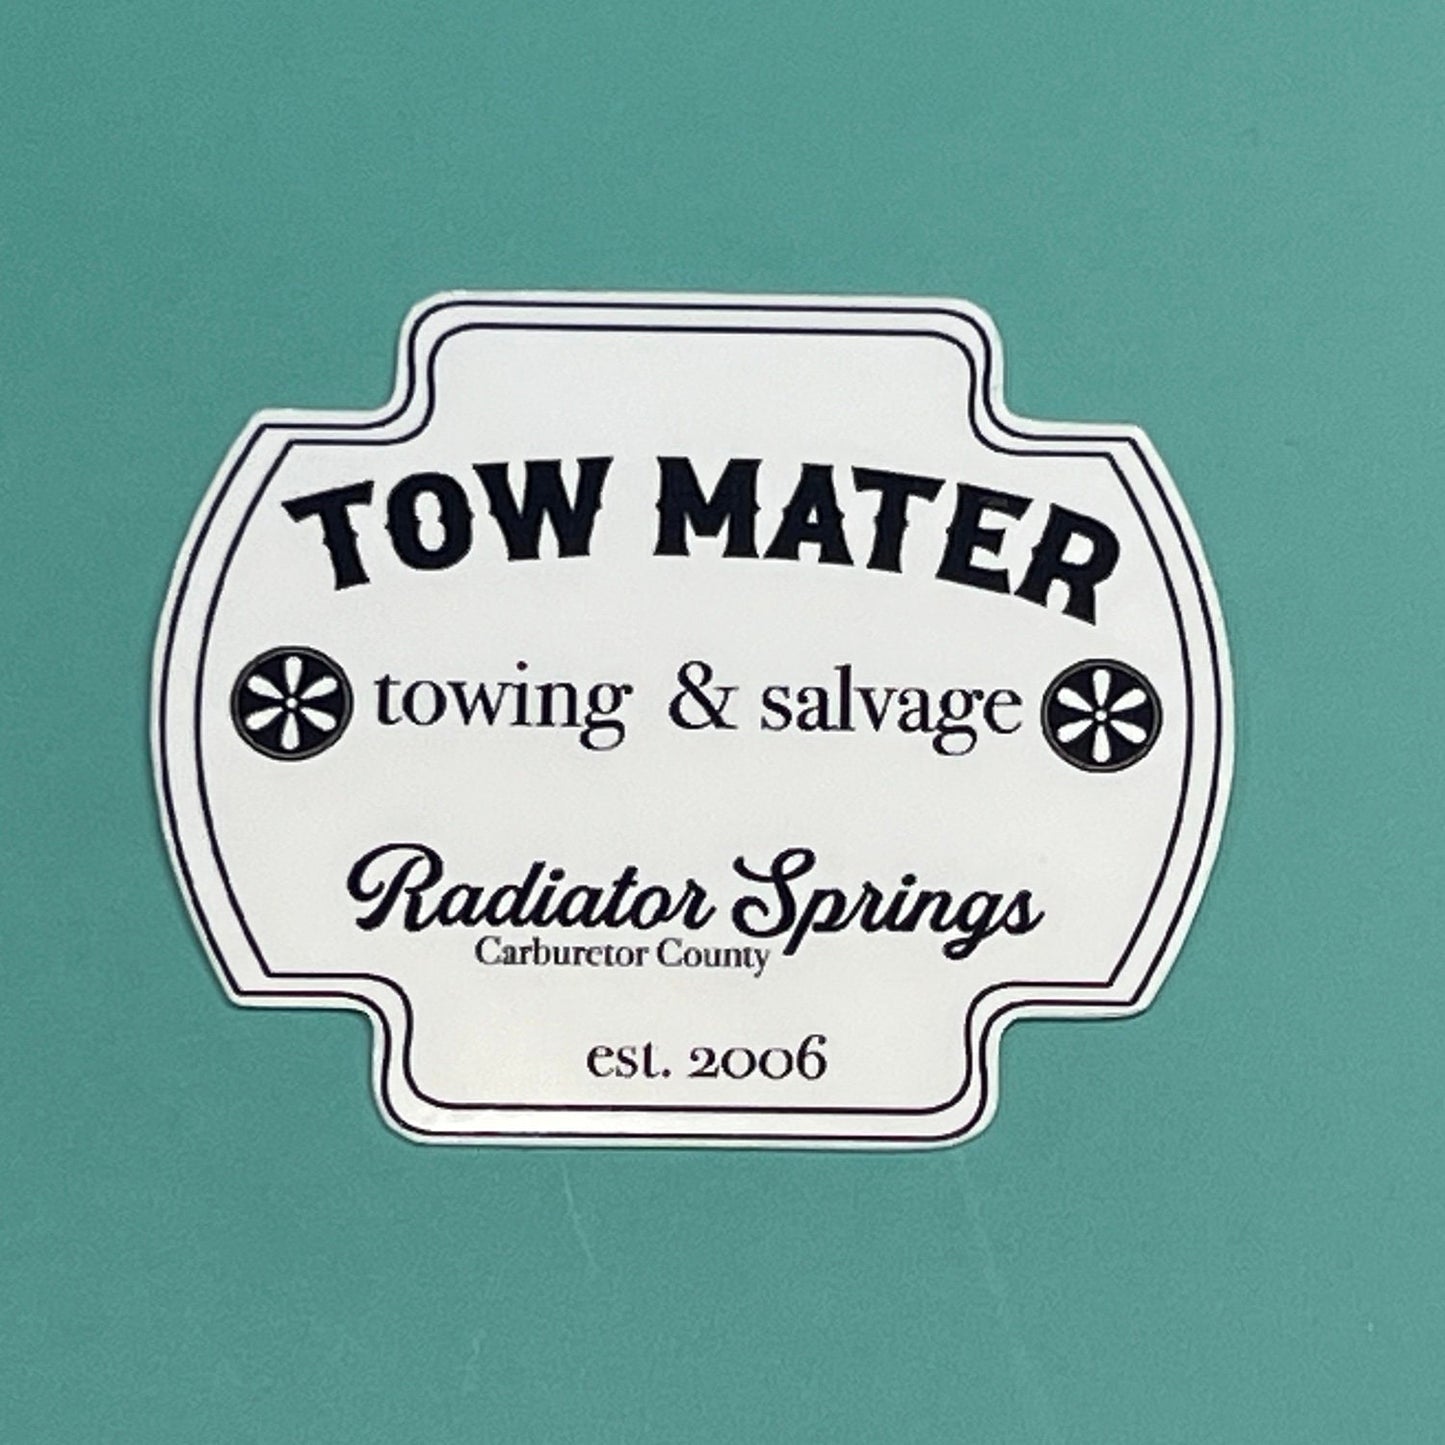 Tow Mater Towing & Salvage Cars Inspired Waterproof Sticker